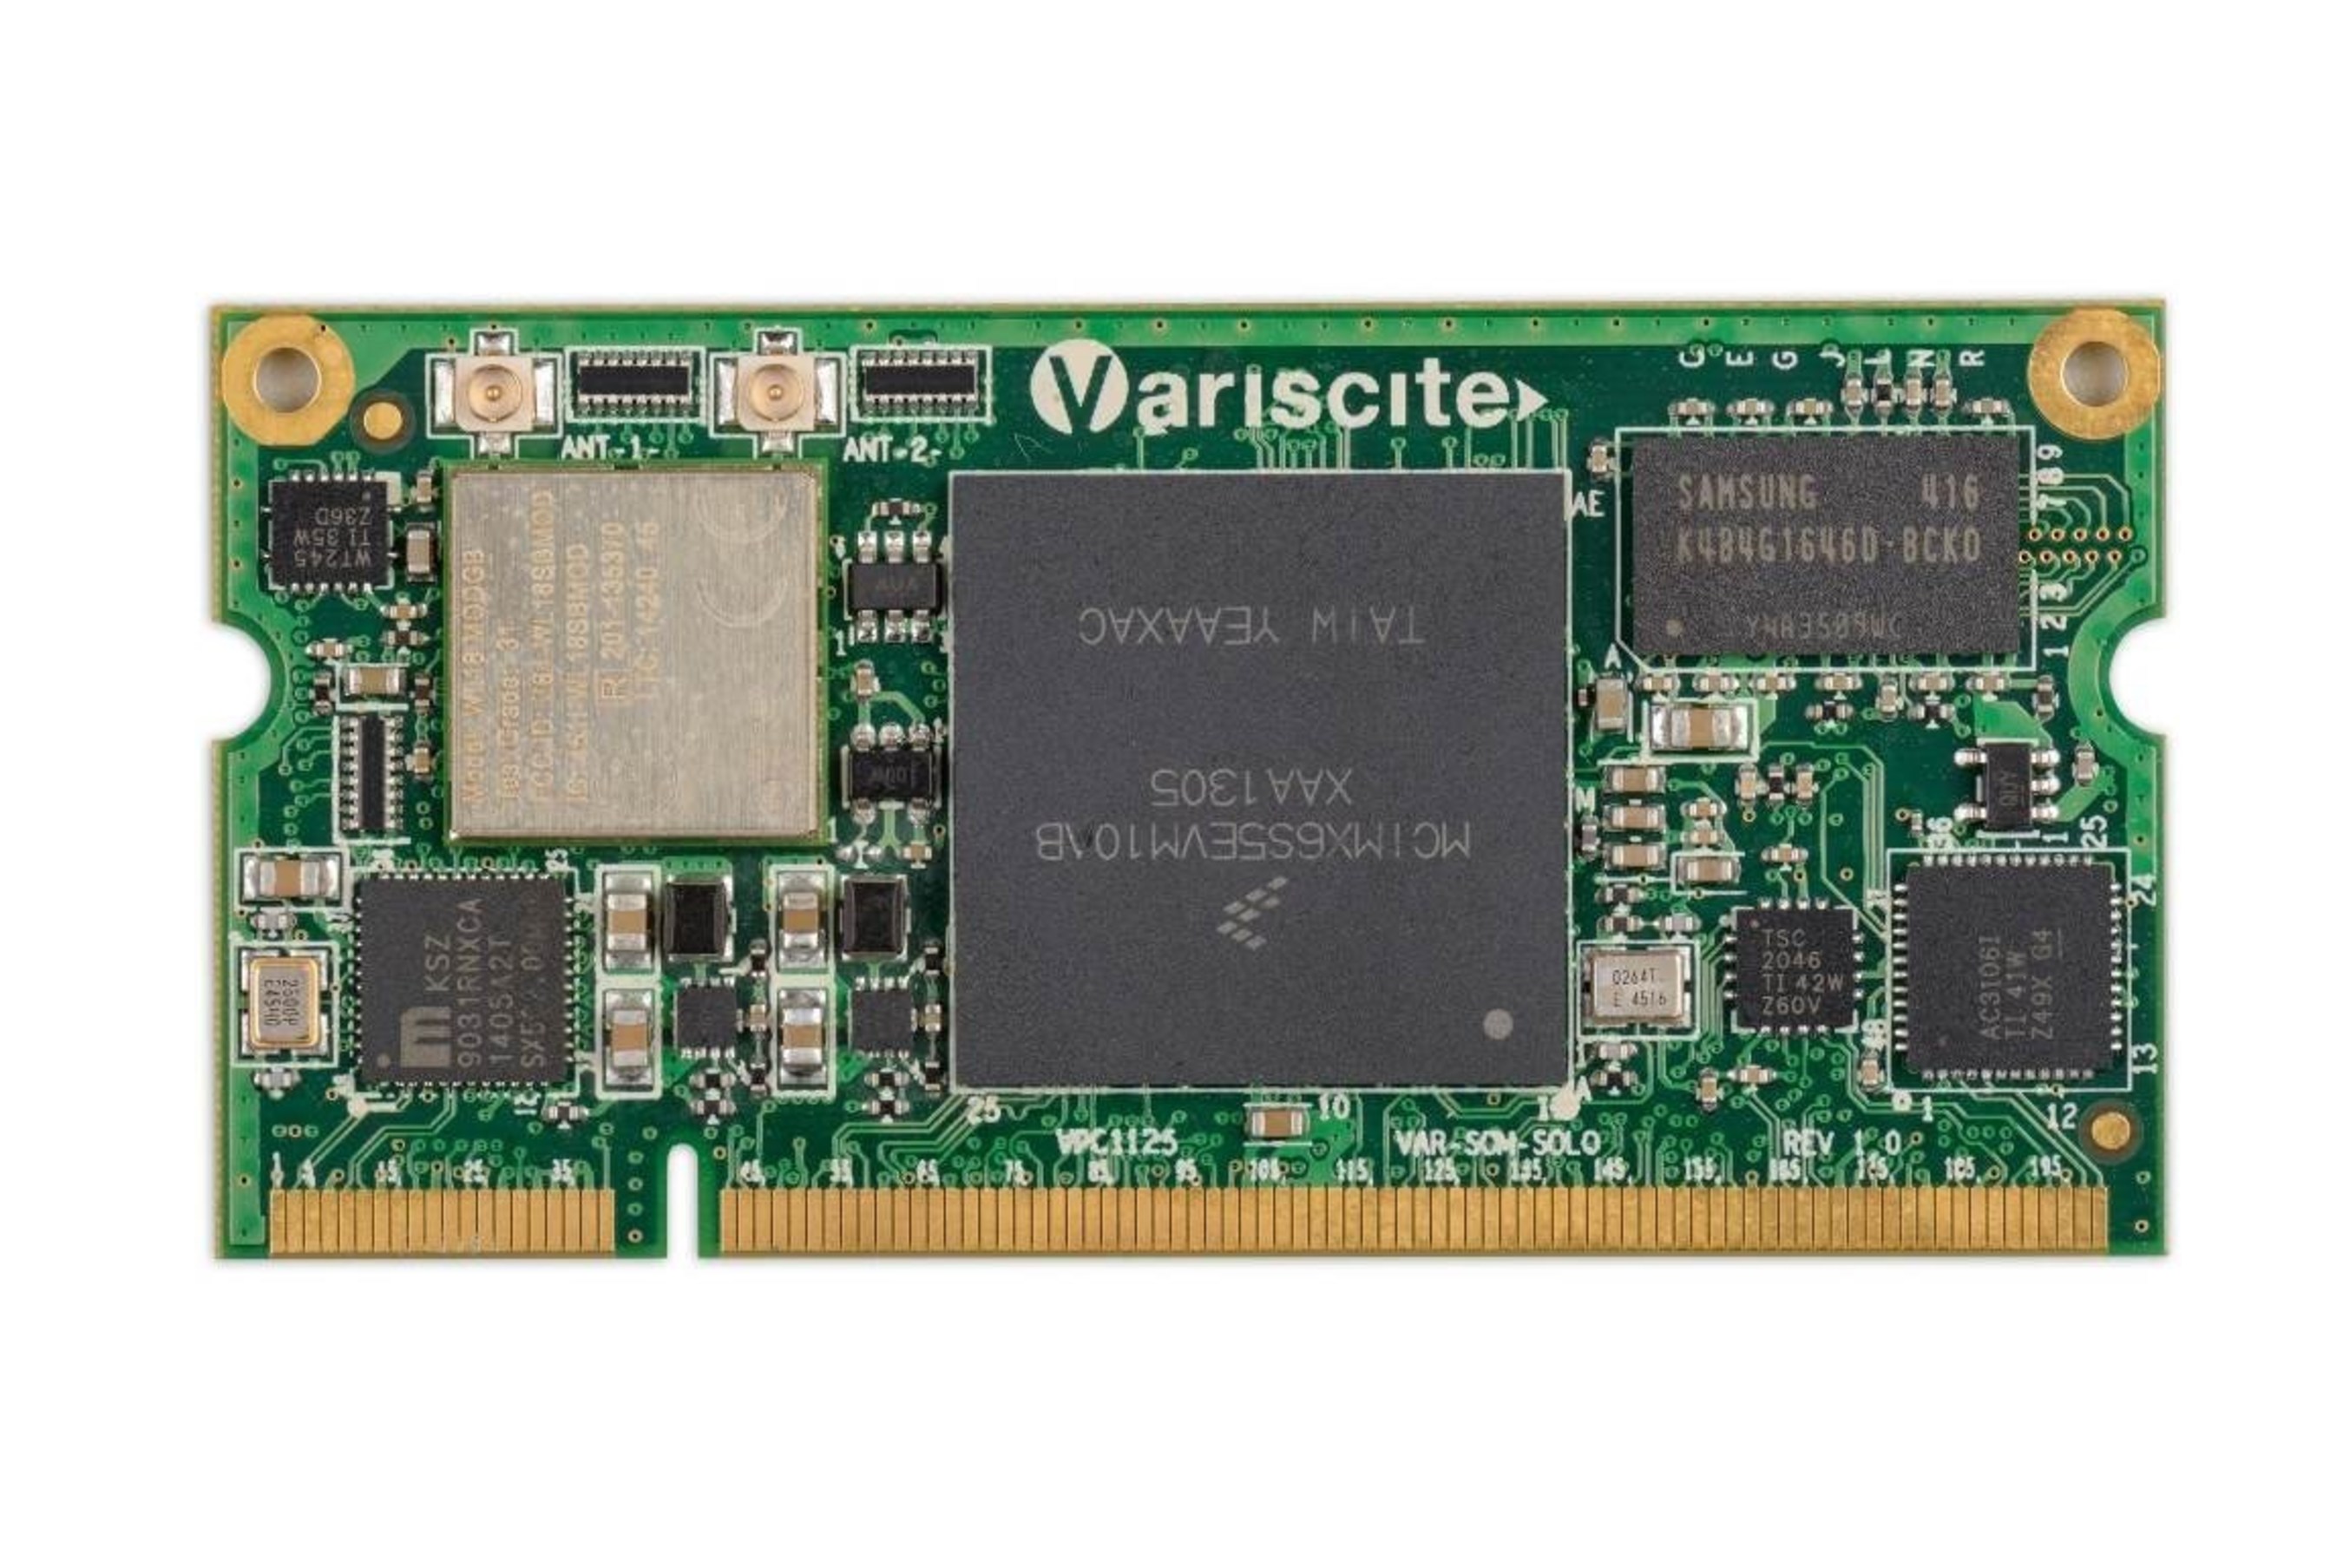 Variscite VAR-SOM-SOLO with Freescale i.MX6 1GHz Cortex-A9 introduces advanced feature-set, small form-factor and a cost-efficient System-on-Module solution for a variety of embedded markets and products